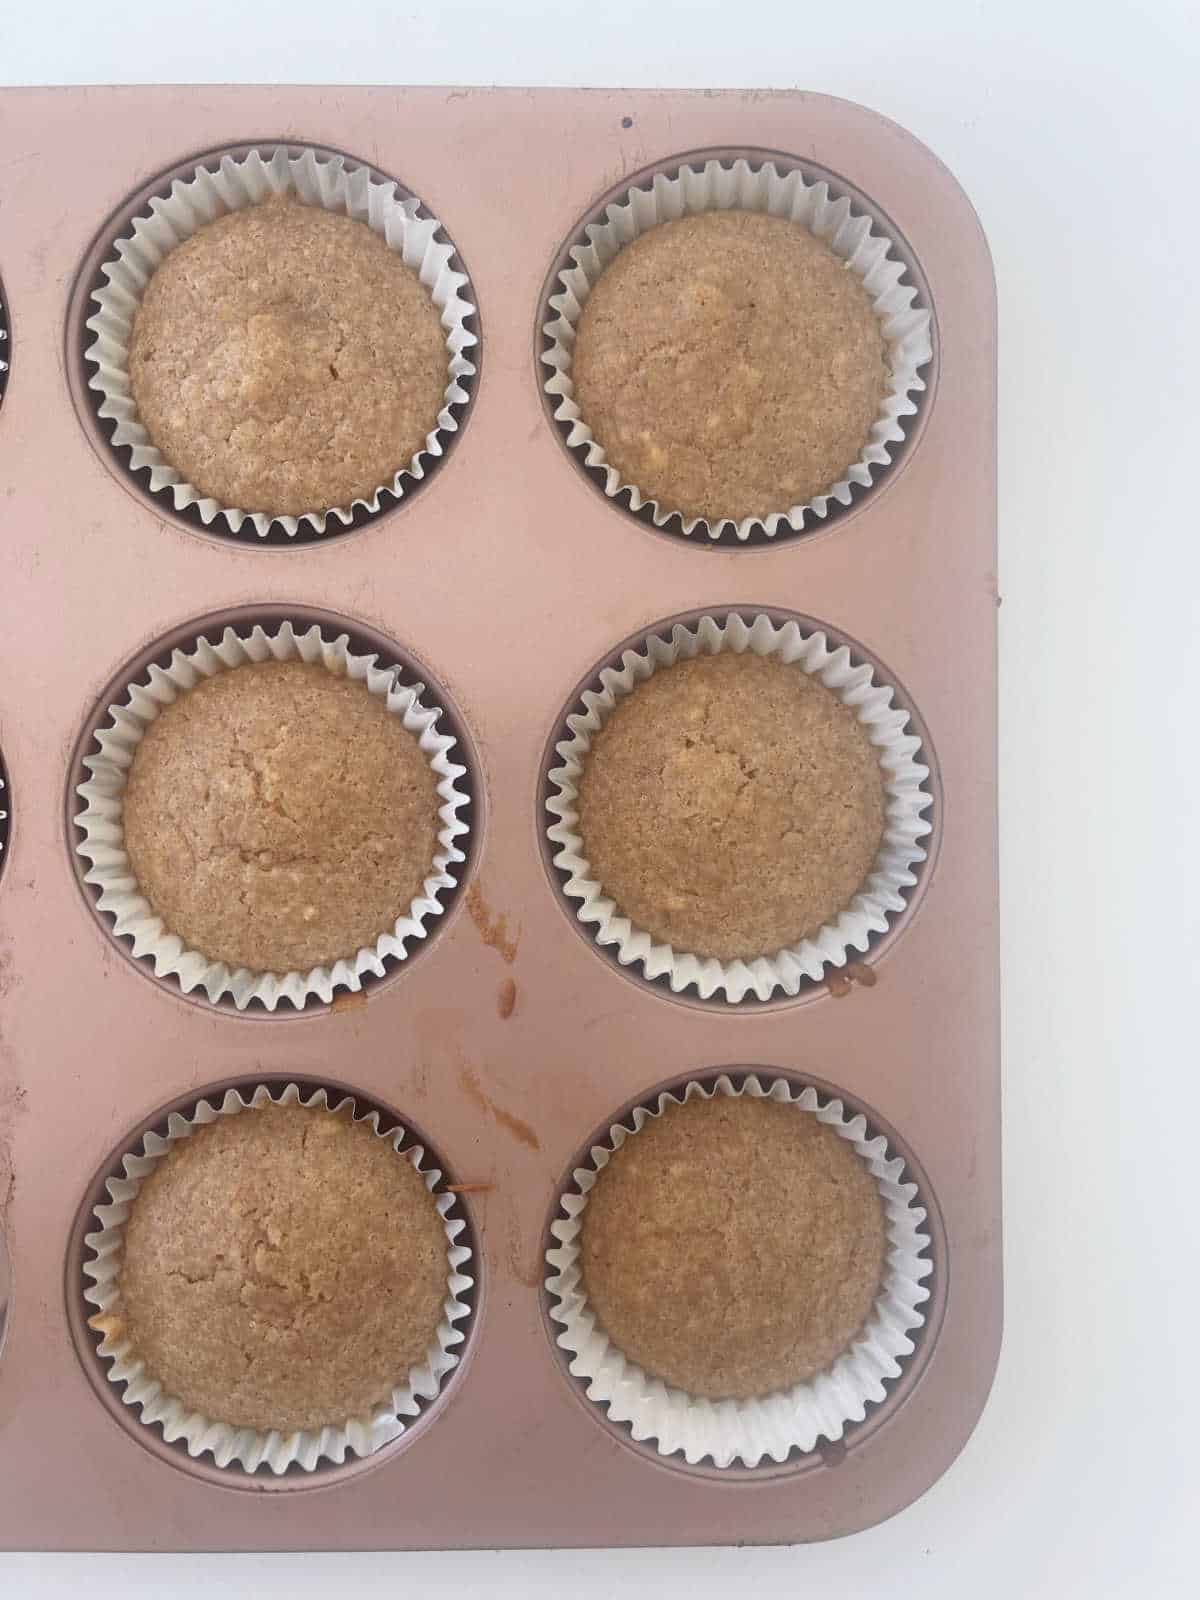 Baked APple and Cinnamon Muffins in a rose gold muffin tray.